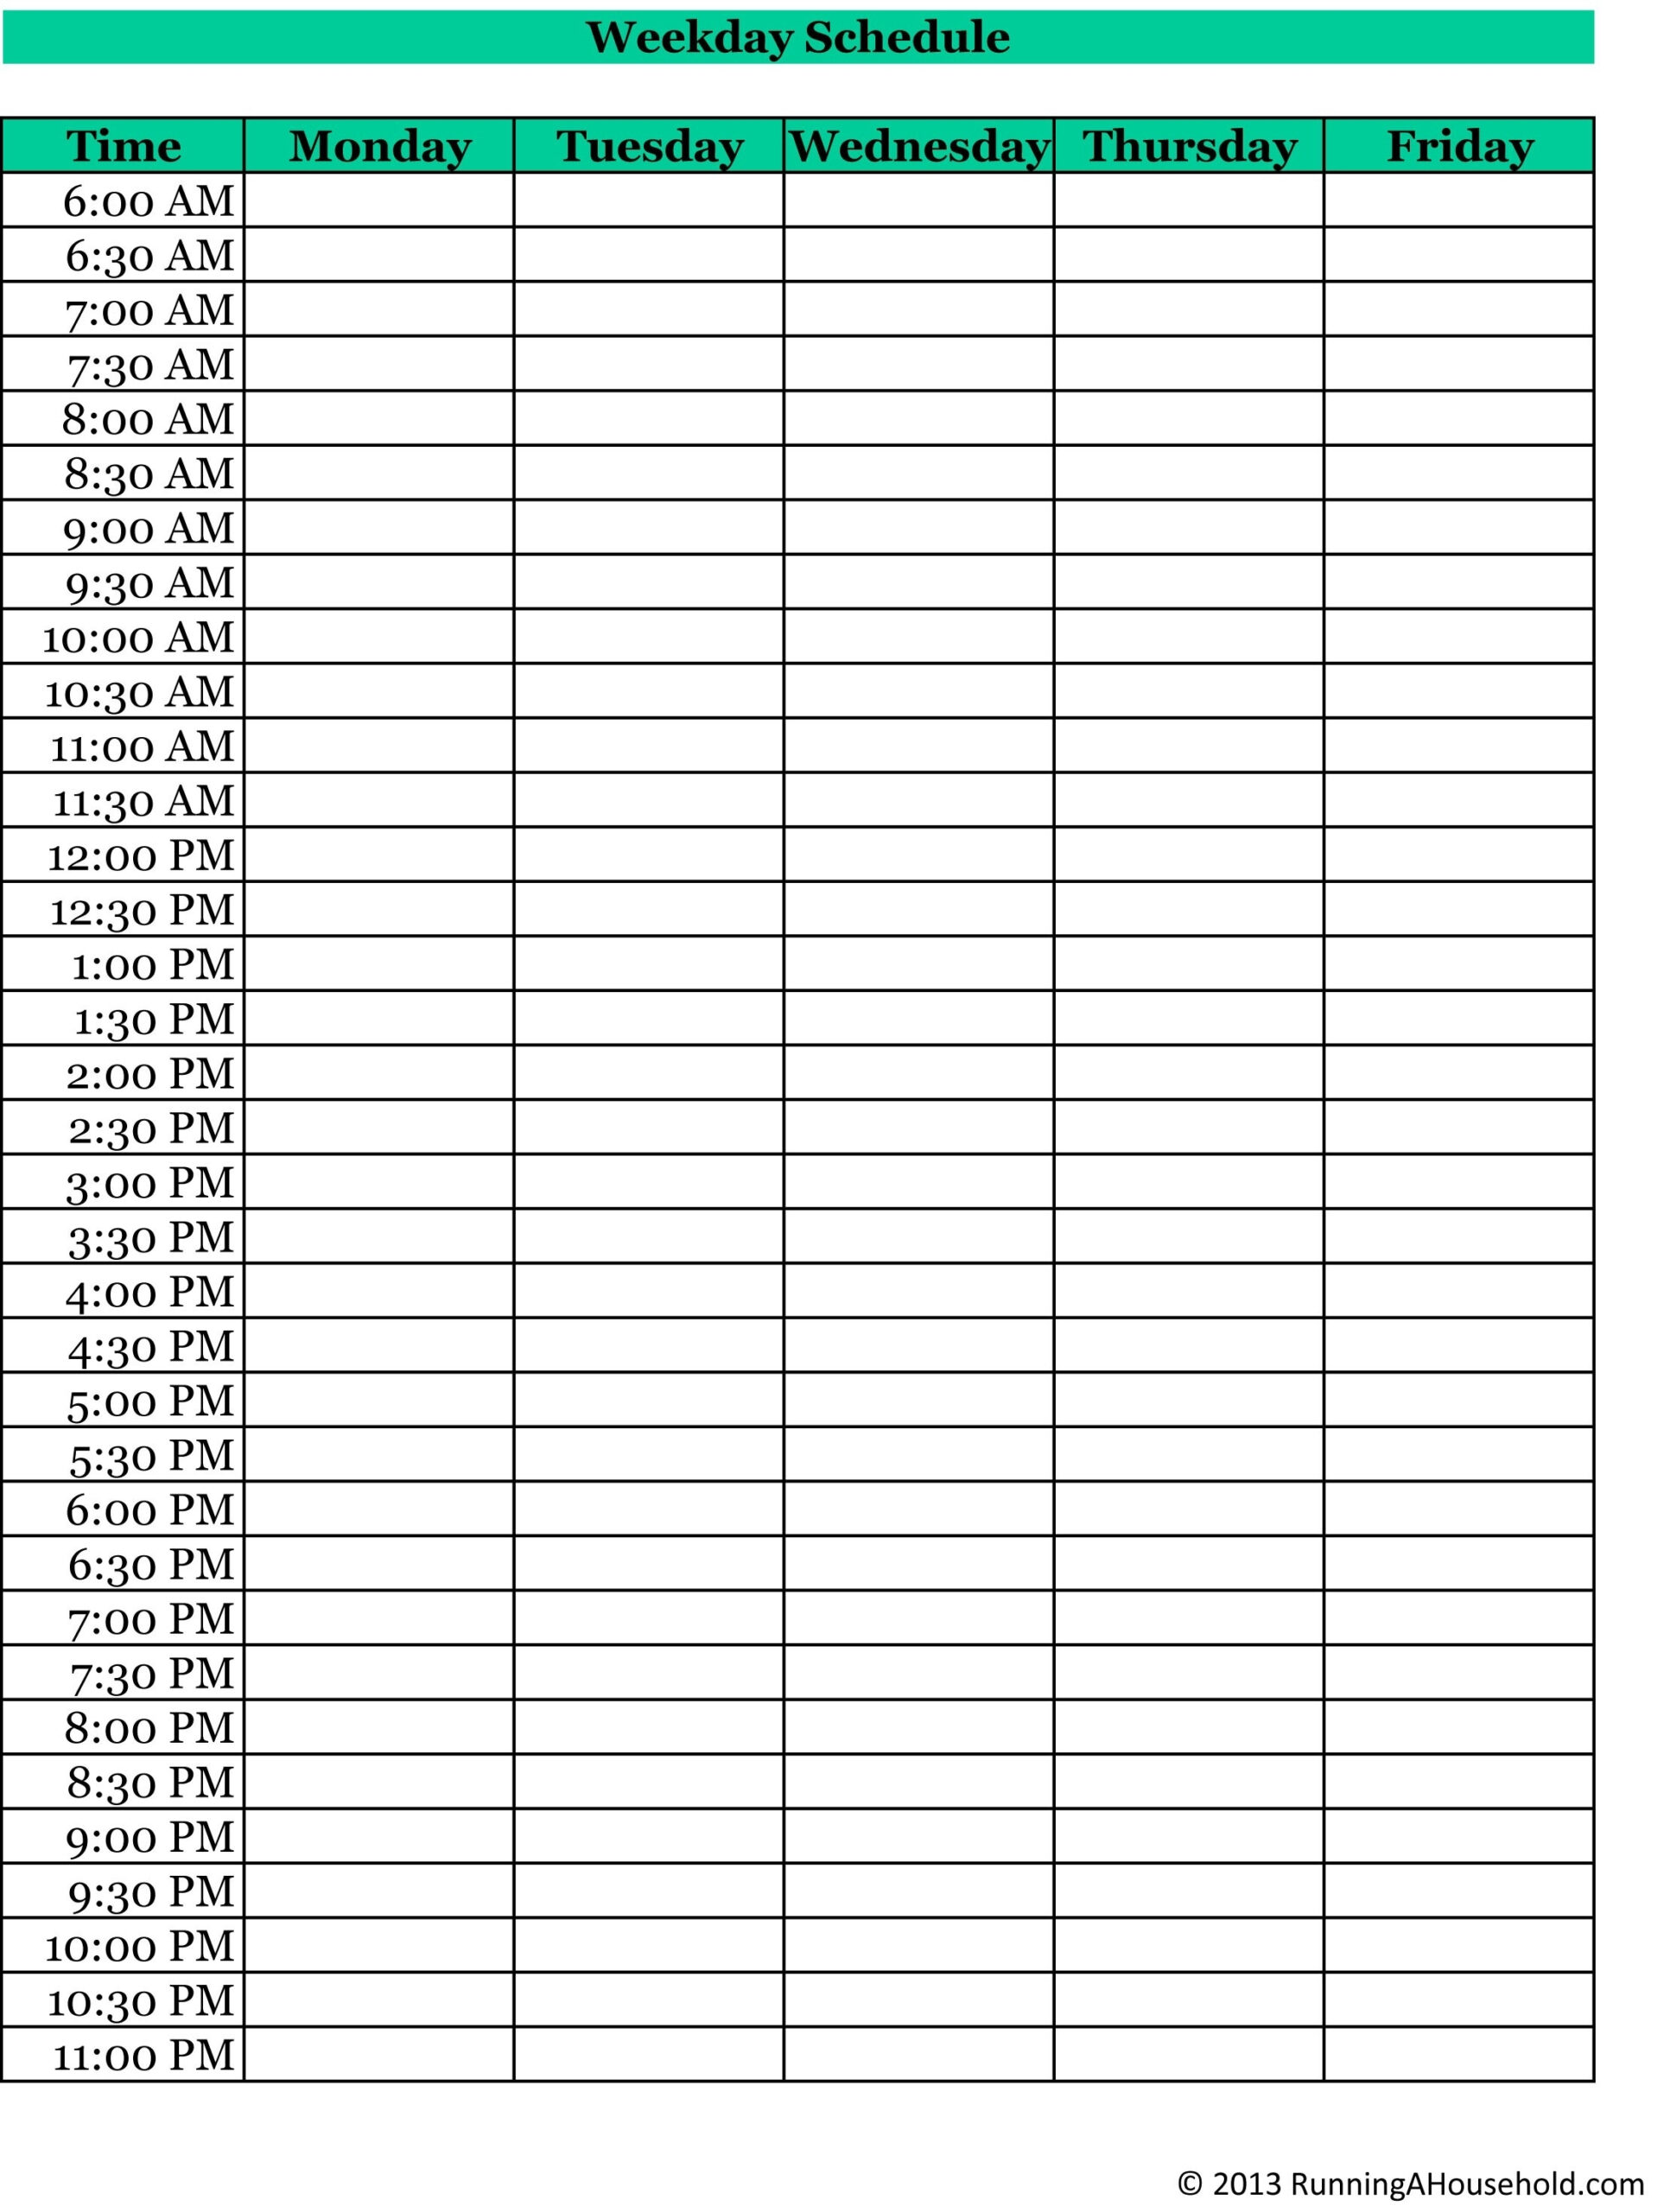 Printable Weekly Schedule With Hours Monday To Friday Calendar with Schedule Mondy To Friday